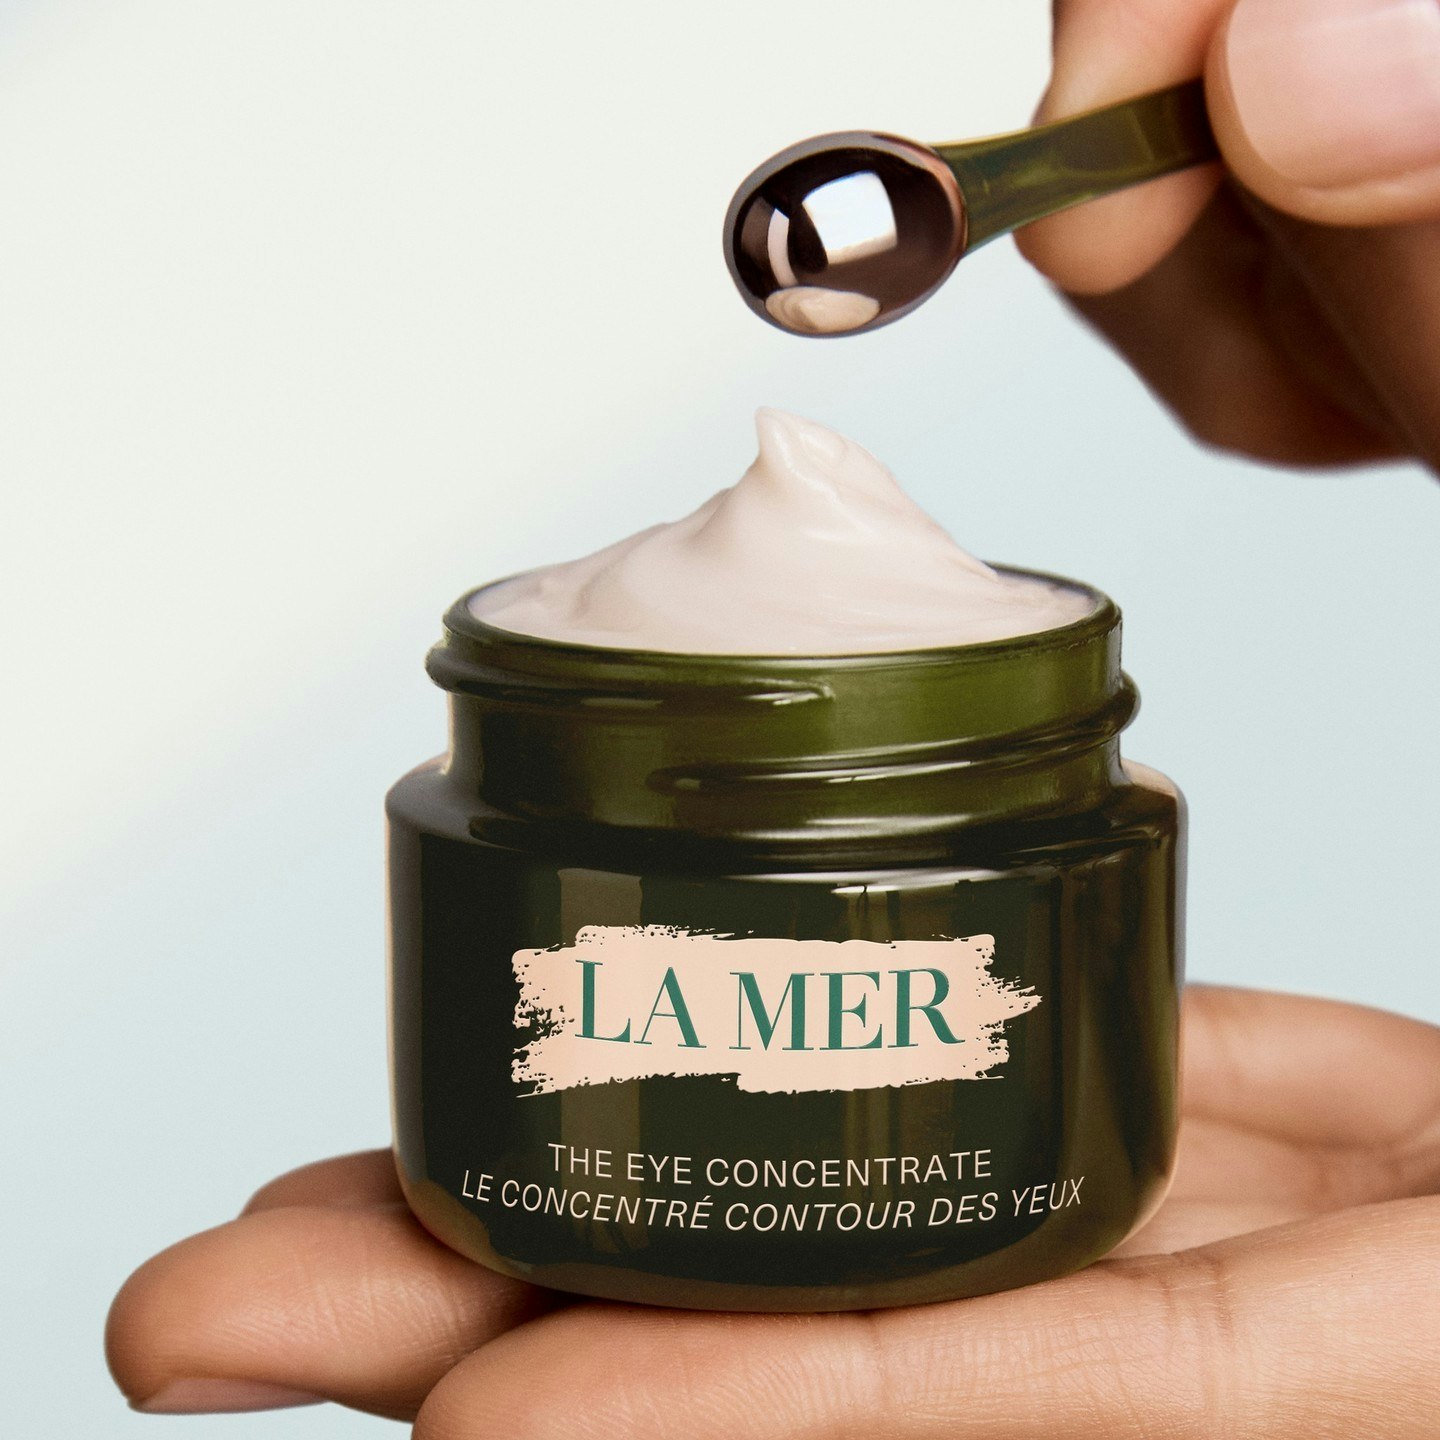 Friday – La Mer, The Eye Concentrate, £185